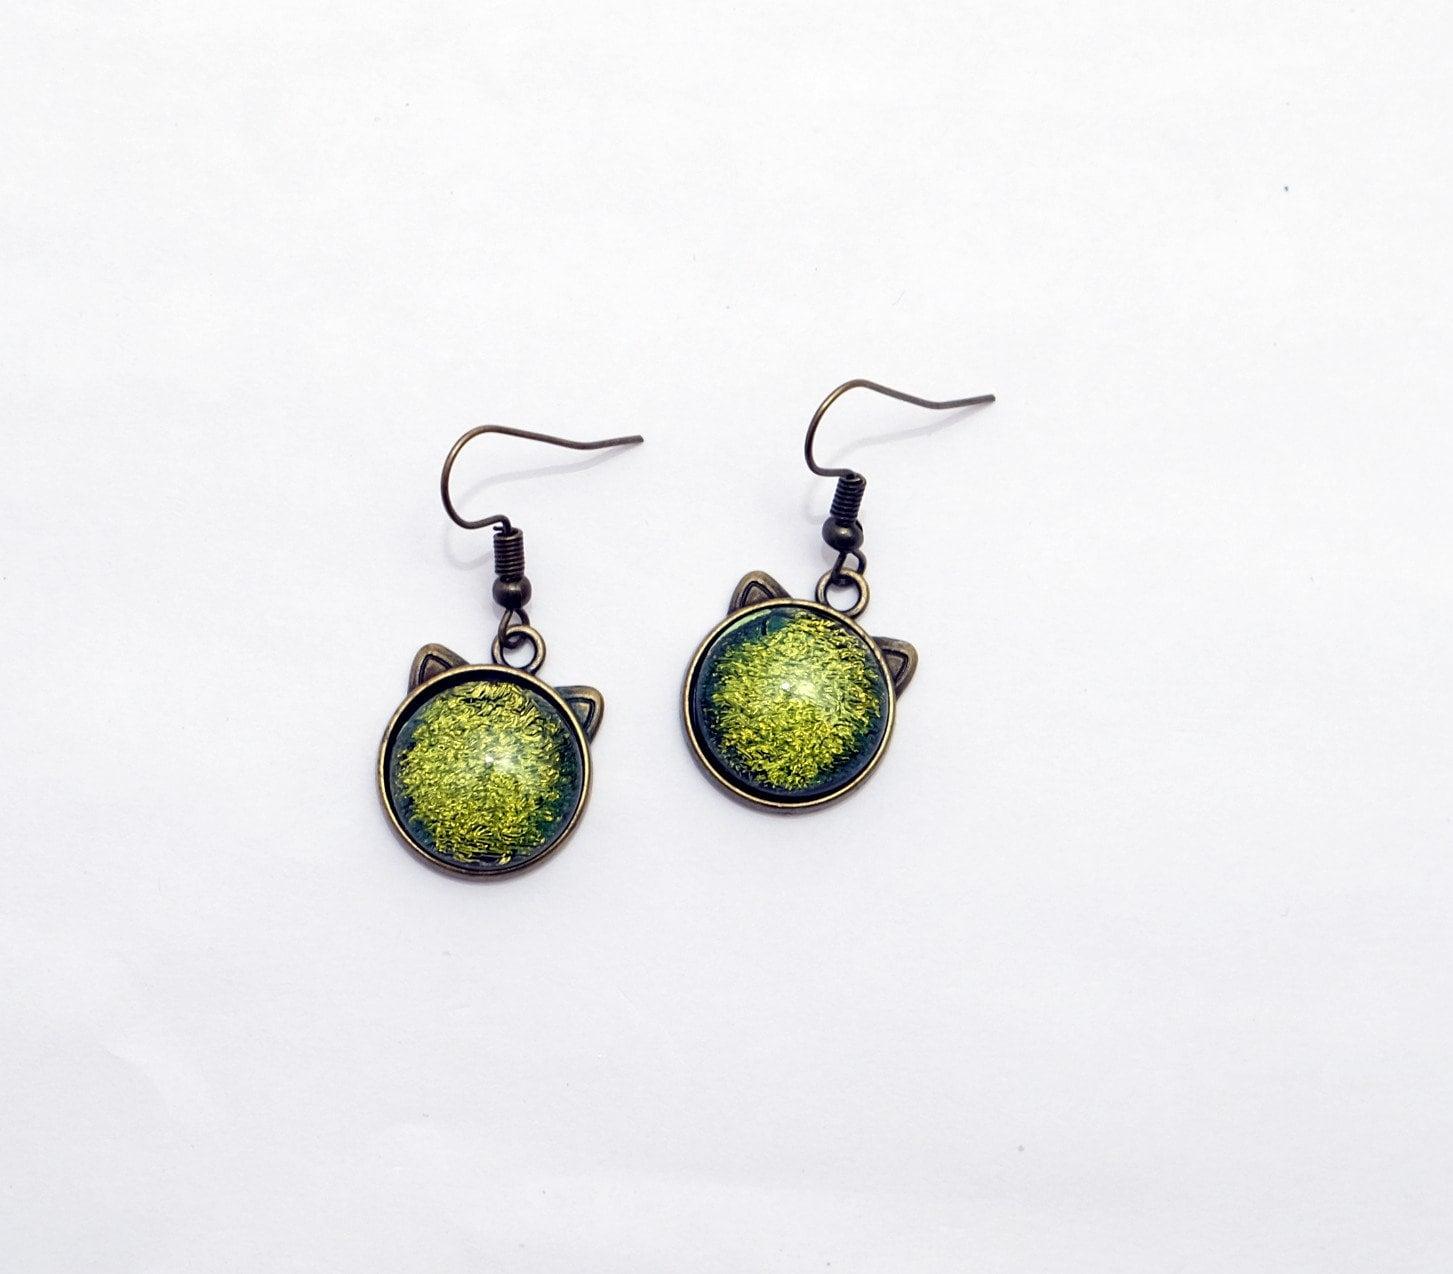 Whimsical Cat Head Shaped pierced Earrings - Brass Tone with Yellow Green Dichroic Glass seedsglassworks seeds glassworks